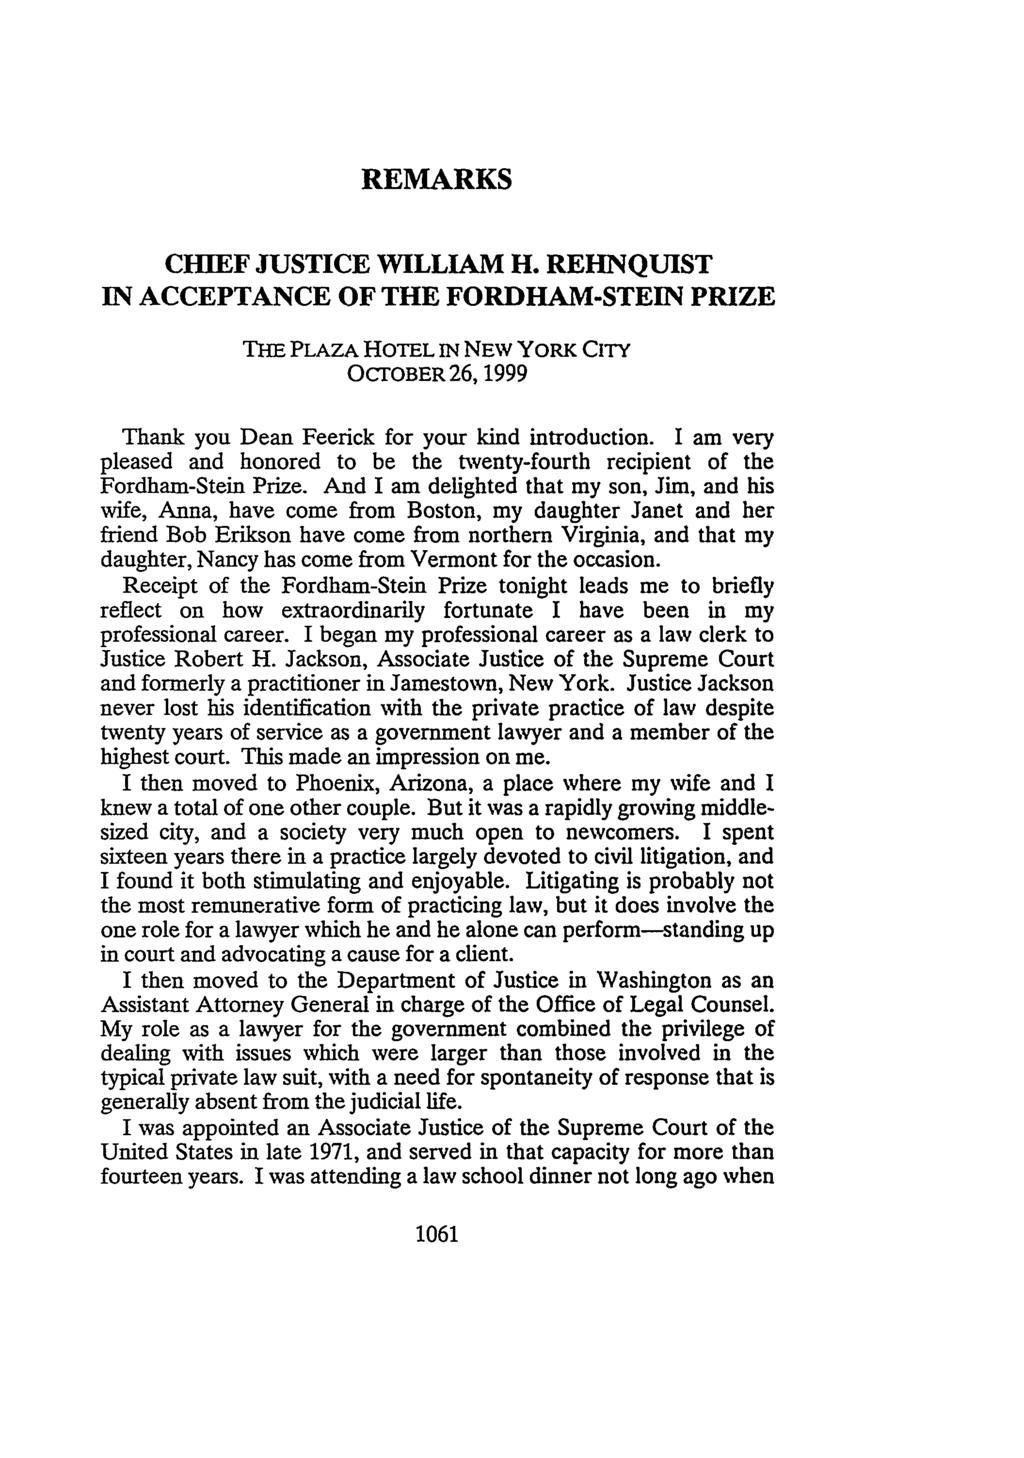 REMARKS CHIEF JUSTICE WILLIAM H. REHNQUIST IN ACCEPTANCE OF THE FORDHAM-STEIN PRIZE THE PLAZA HOTEL IN NEW YORK CITY OcrOBER 26, 1999 Thank you Dean Feerick for your kind introduction.